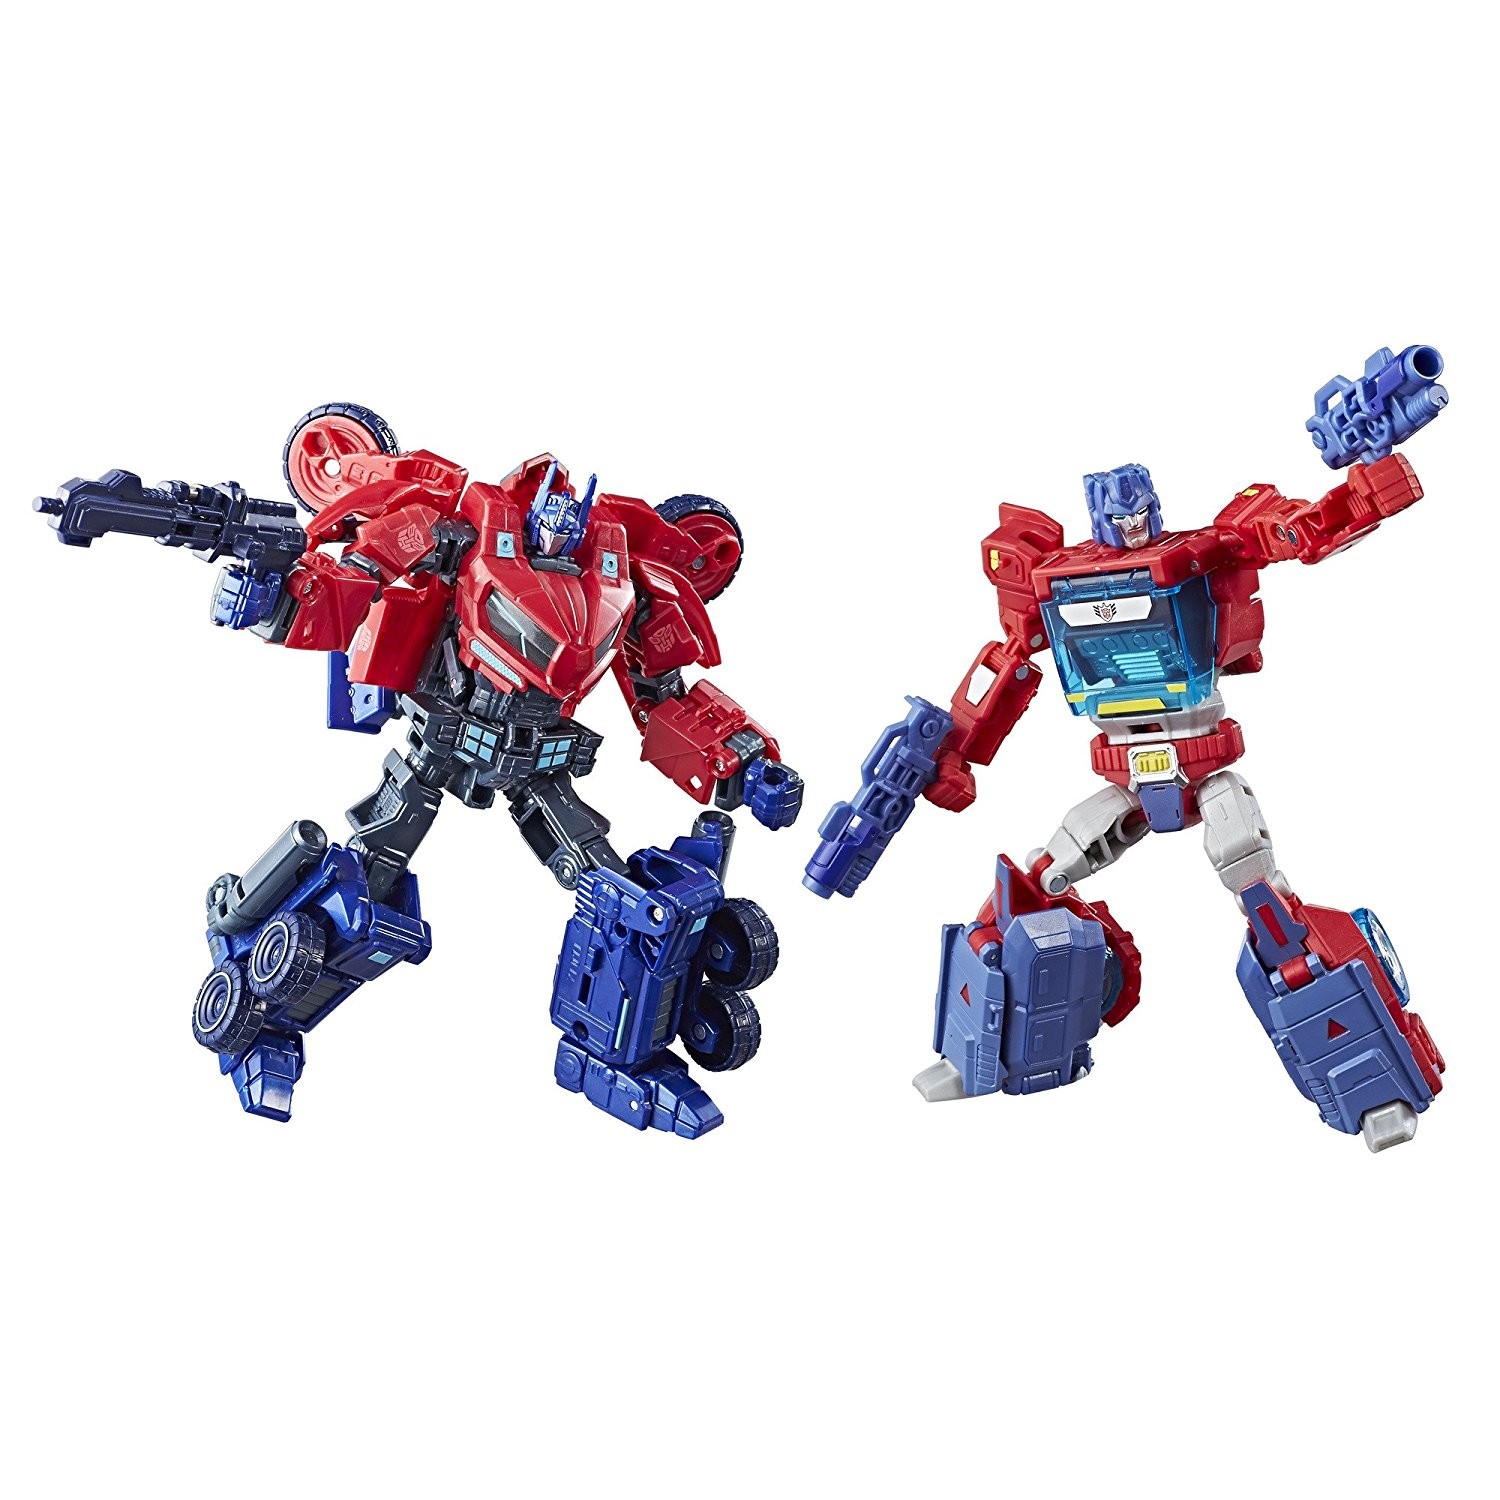 Transformers News: Re: Transformers Tribute Toyline Discussion Thread